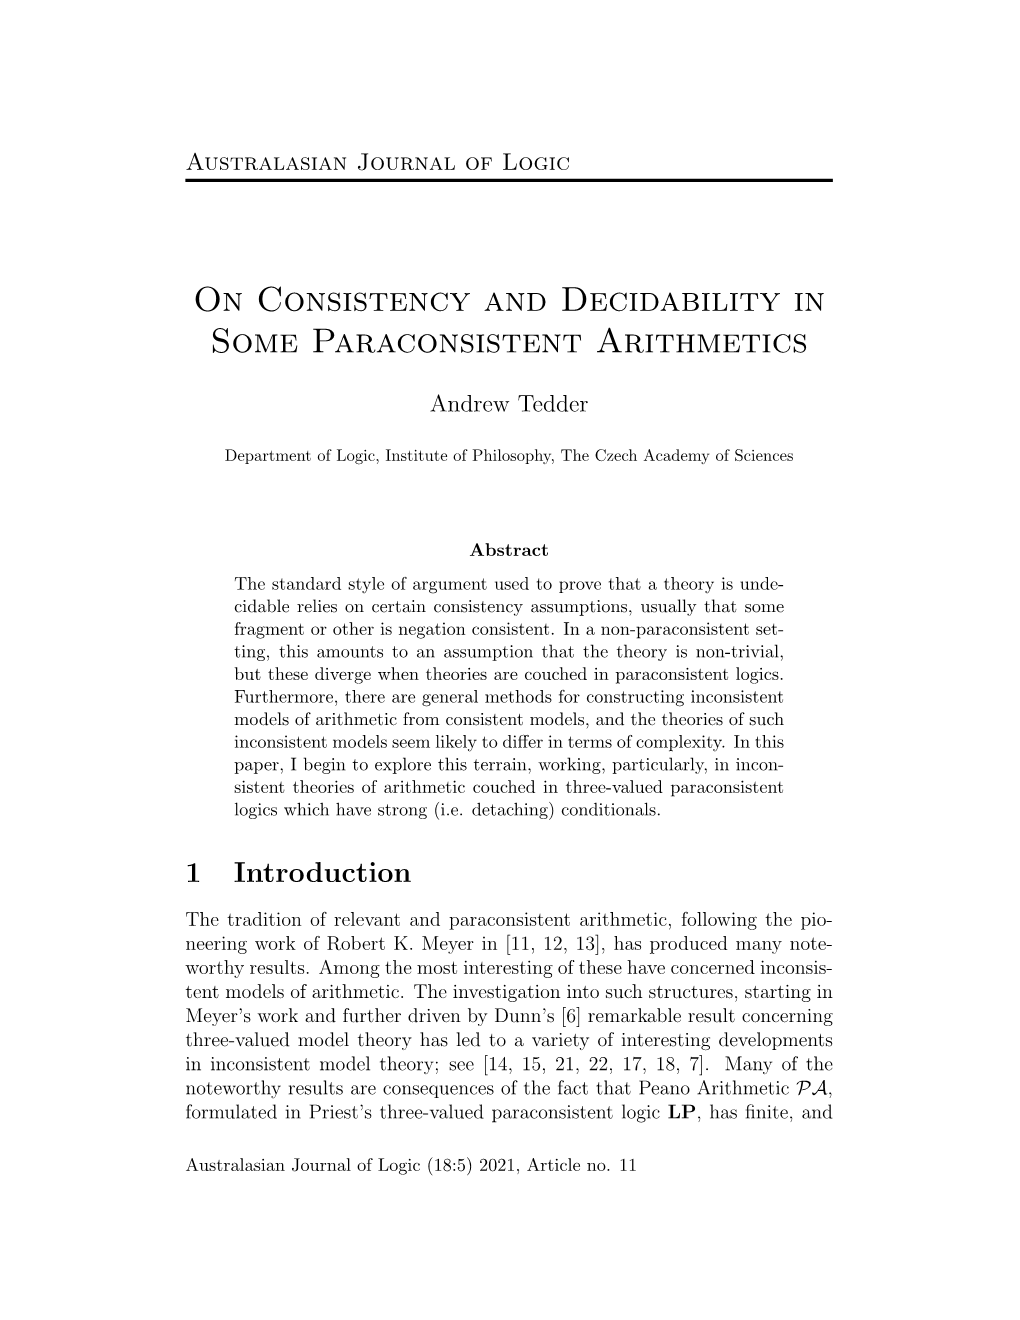 On Consistency and Decidability in Some Paraconsistent Arithmetics